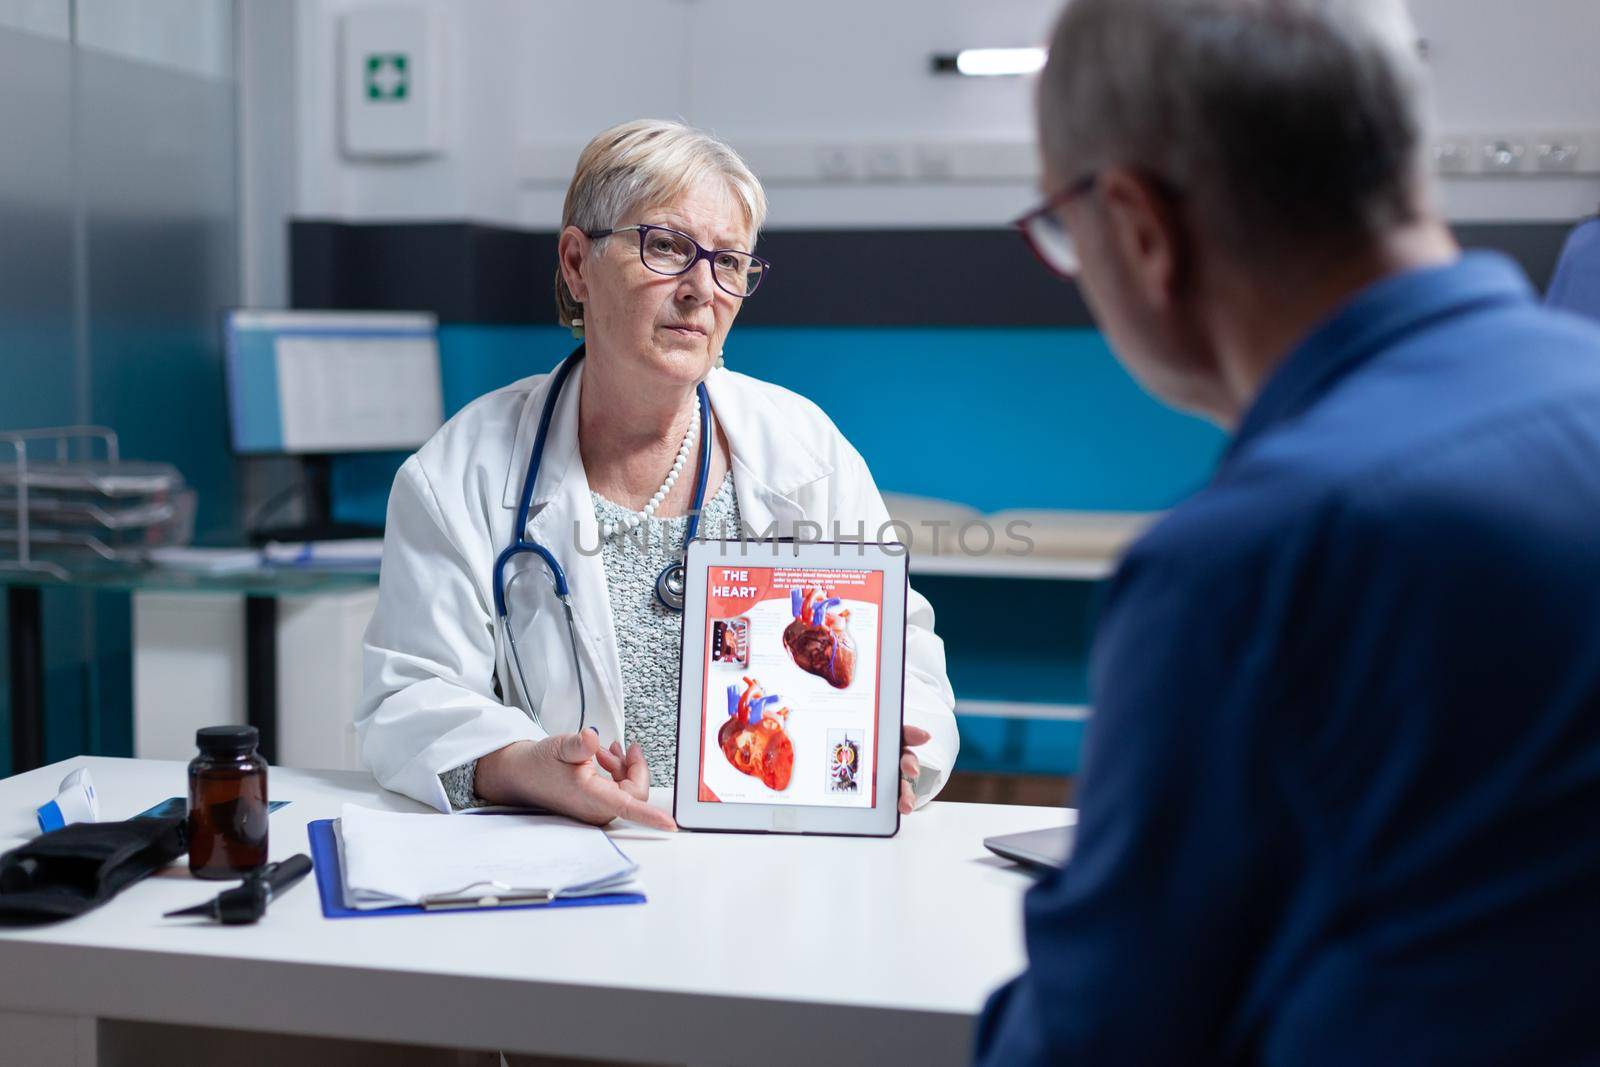 Physician explaining cardiology diagnosis with image of heart organ on tablet to patient. General practitioner showing illustration on cardiovascular system and anatomical structure to man.